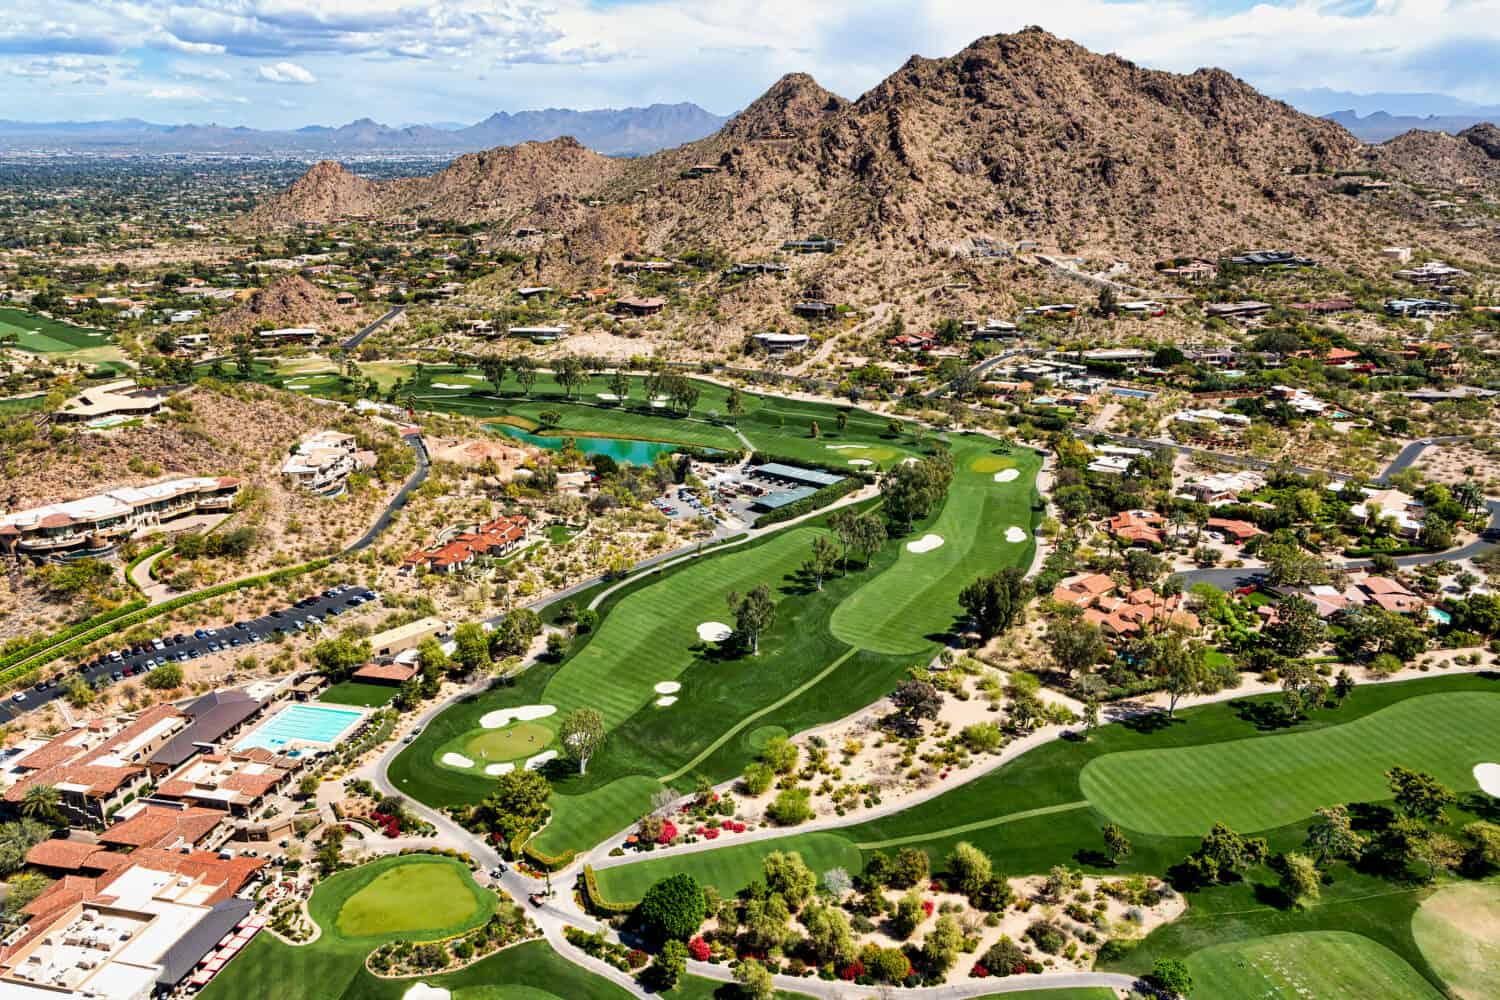 Aerial view from above a scenic golf course in Paradise Valley, Arizona looking to the northeast at Mummy Mountain and the McDowell Mountains in the distance